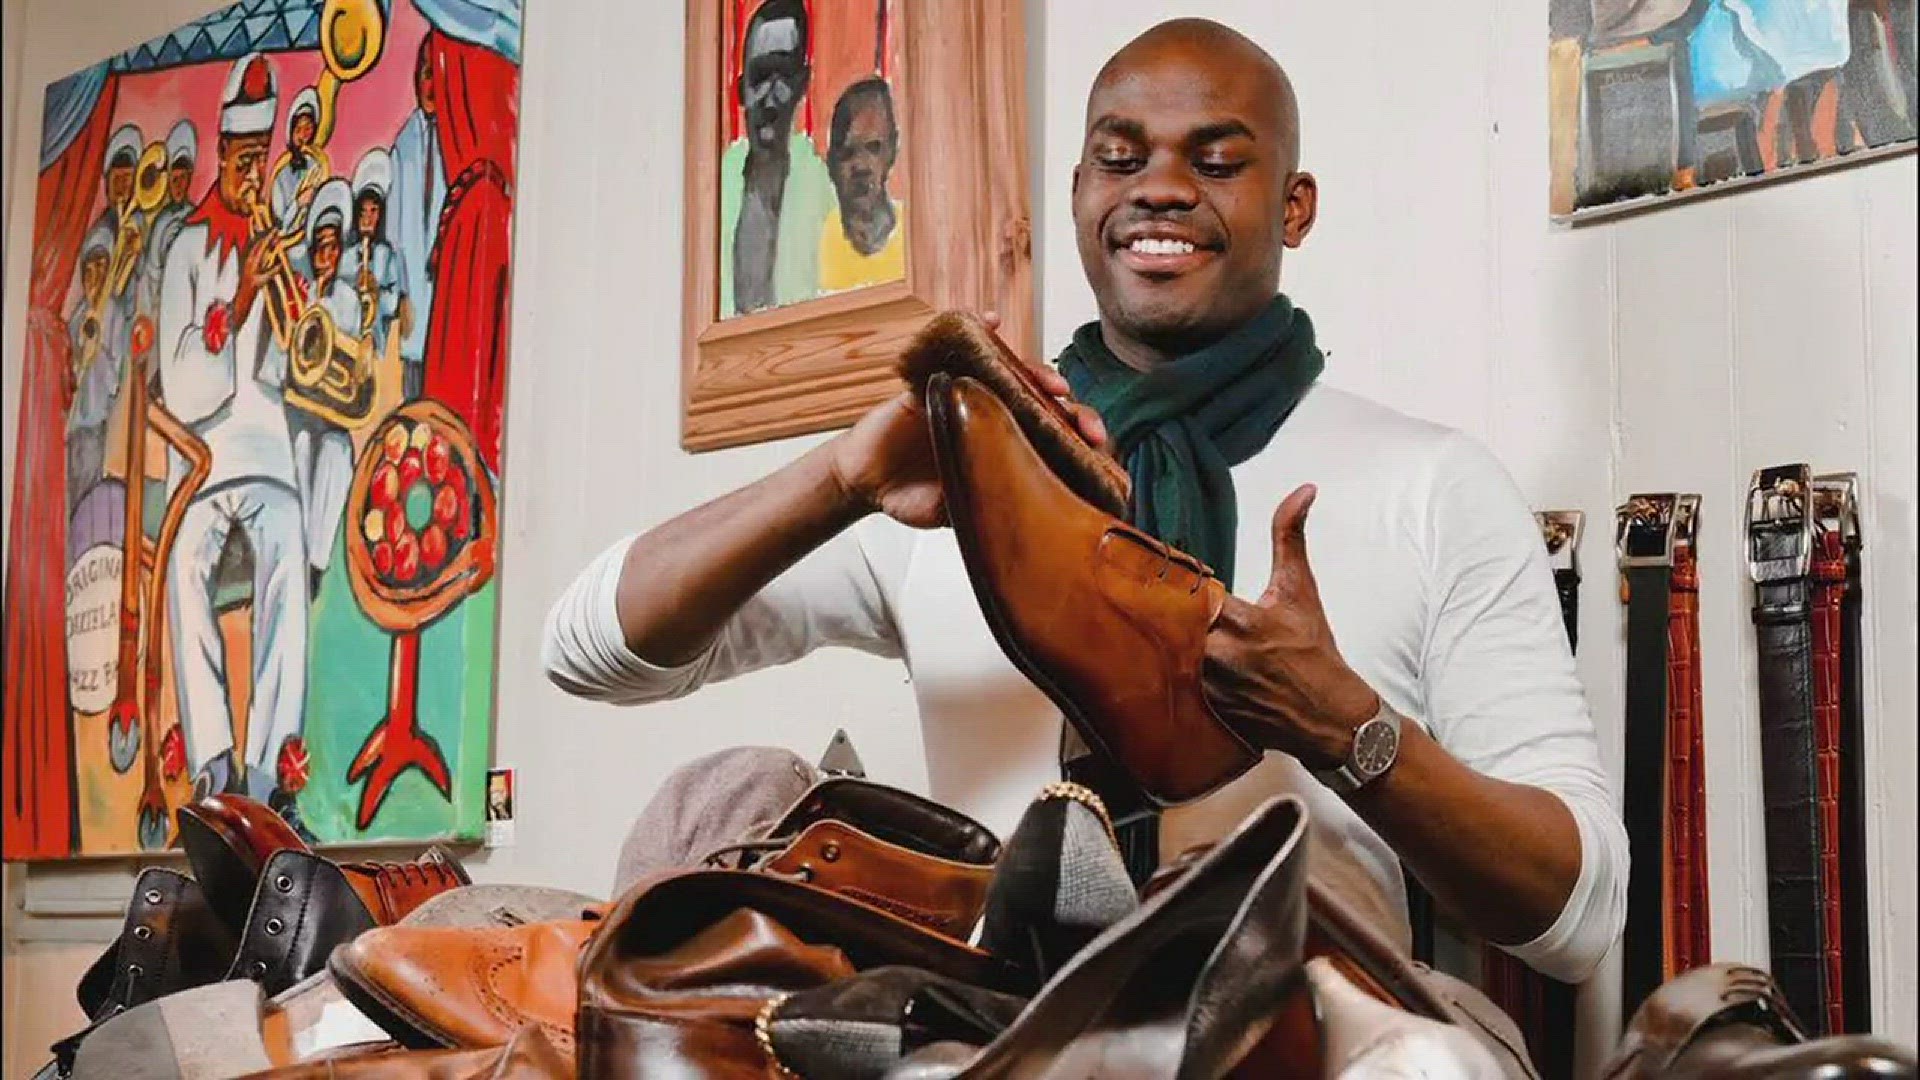 Two years ago, Alexander Bourne was a rising young entrepreneur who hit the New Orleans social scene by storm. He cultivated a glitzy image and he aggressively marketed his business – Patina Shoe Parlor – as a high-end mobile shoe repair service for busy